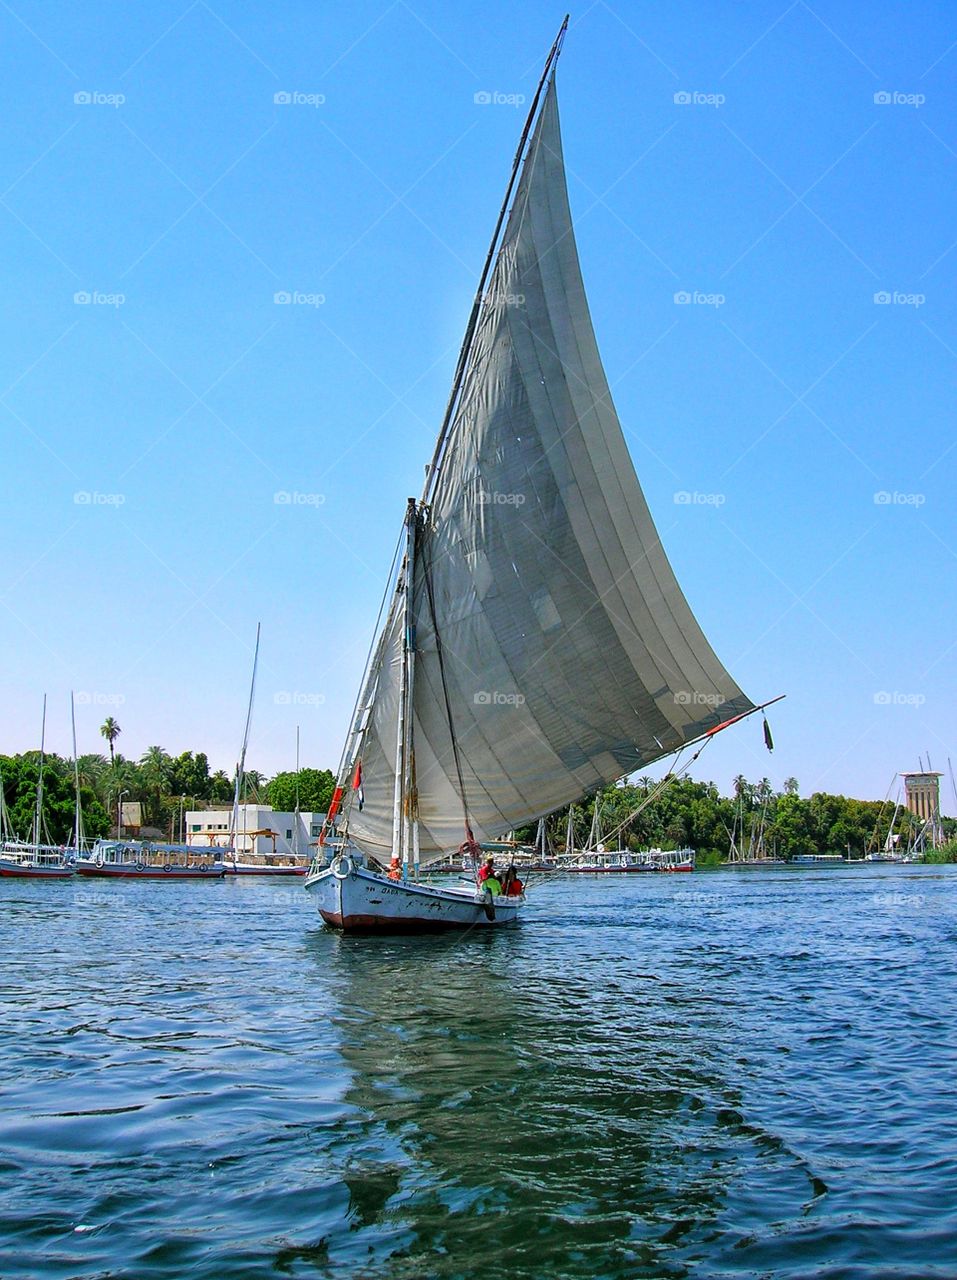 Felucca sailing on the Nile River, Luxor, Egypt.